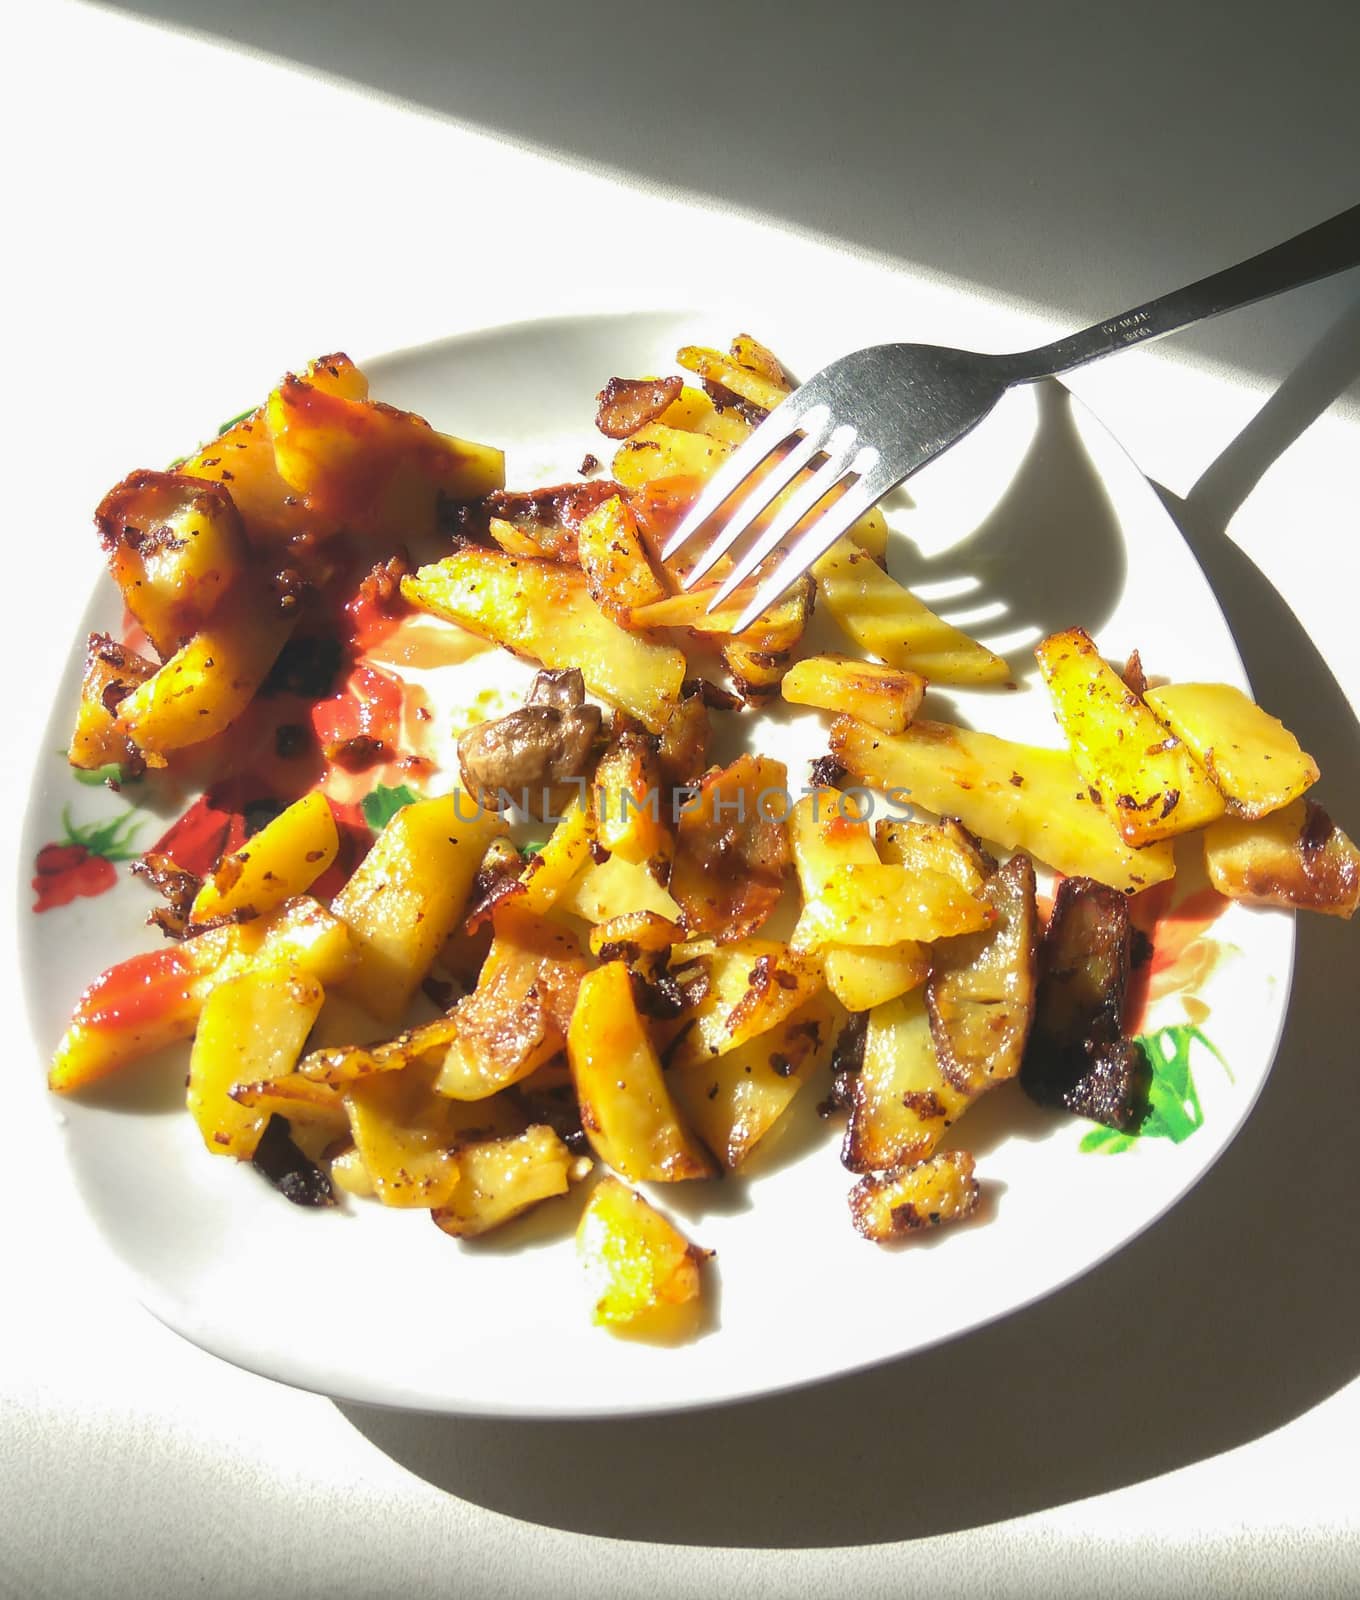 Fried potatoes with mushrooms on a plate